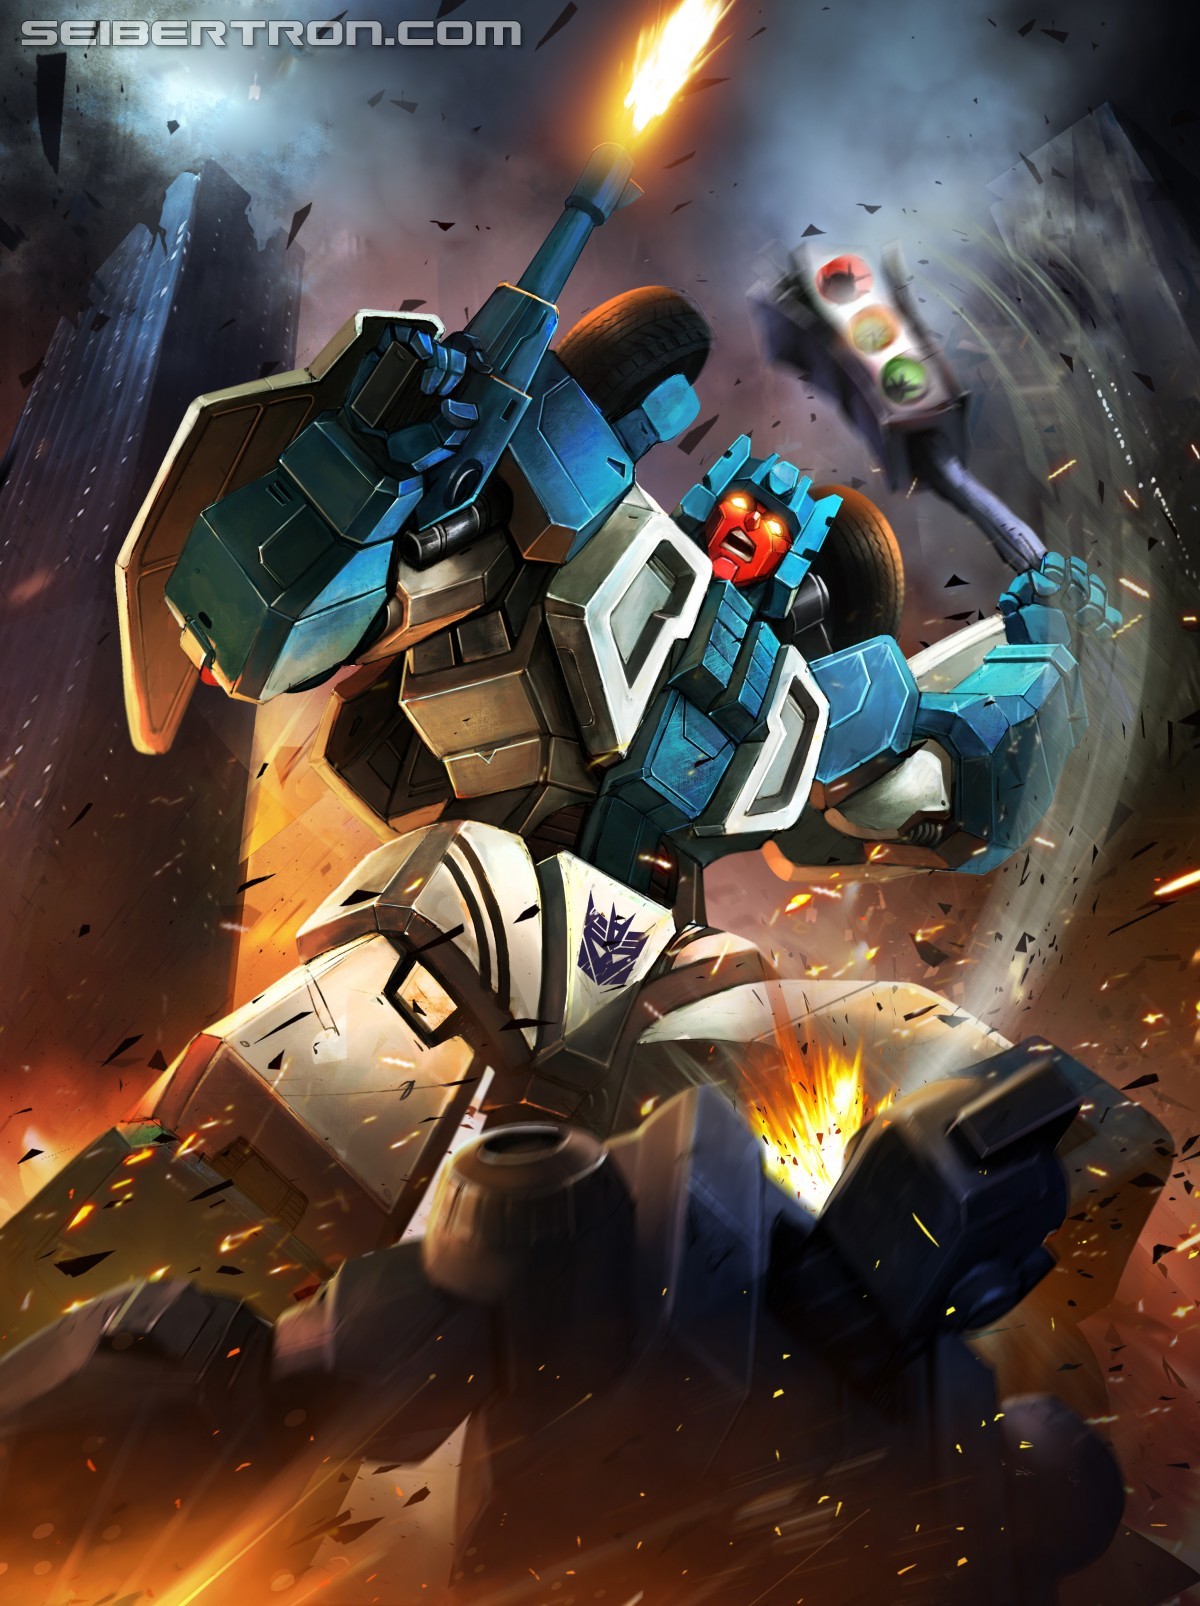 Re: Transformers: Legends Mobile Device Game Updates